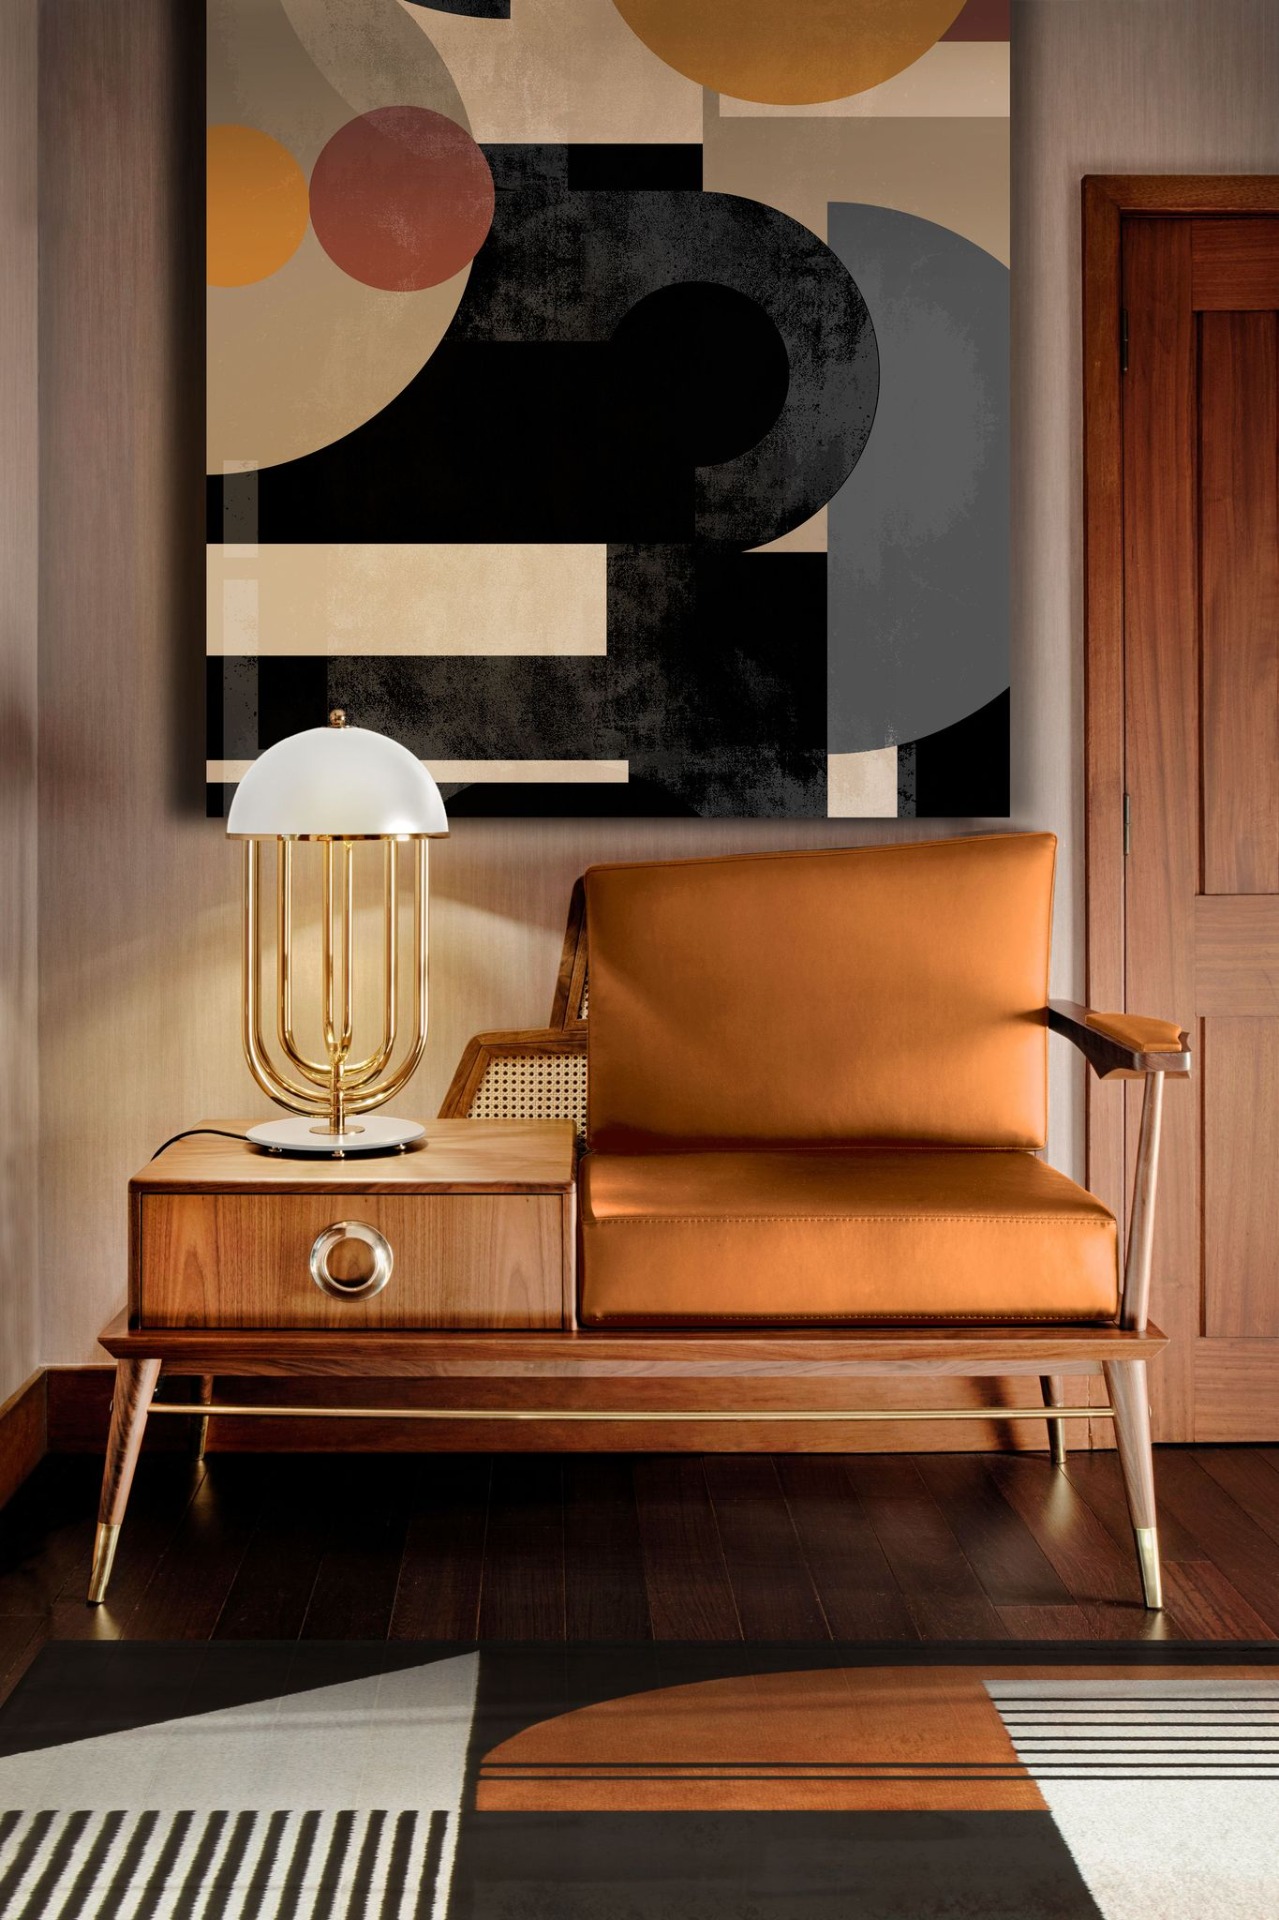 iSaloni exhibitors list for Salone Del Mobile 2022: midcentury decor with black and orange rug